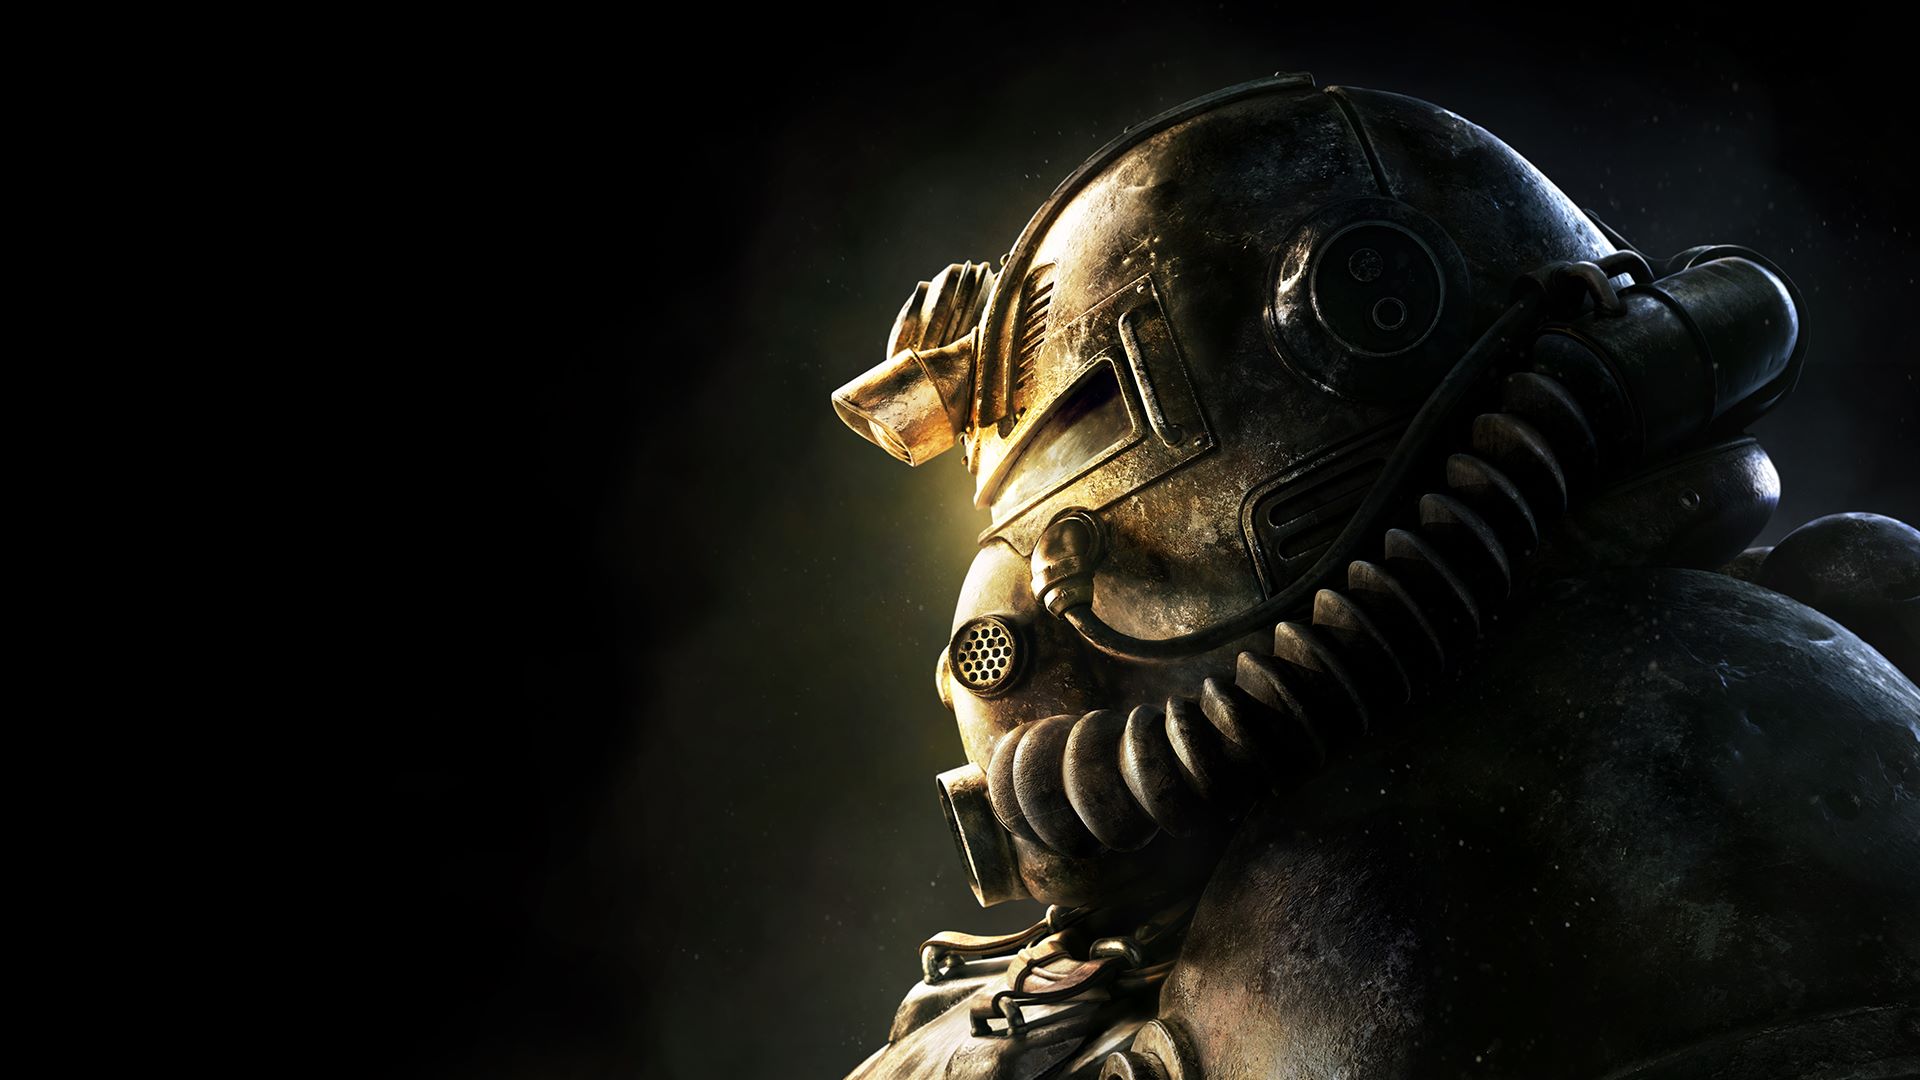 Fallout 4 armored character